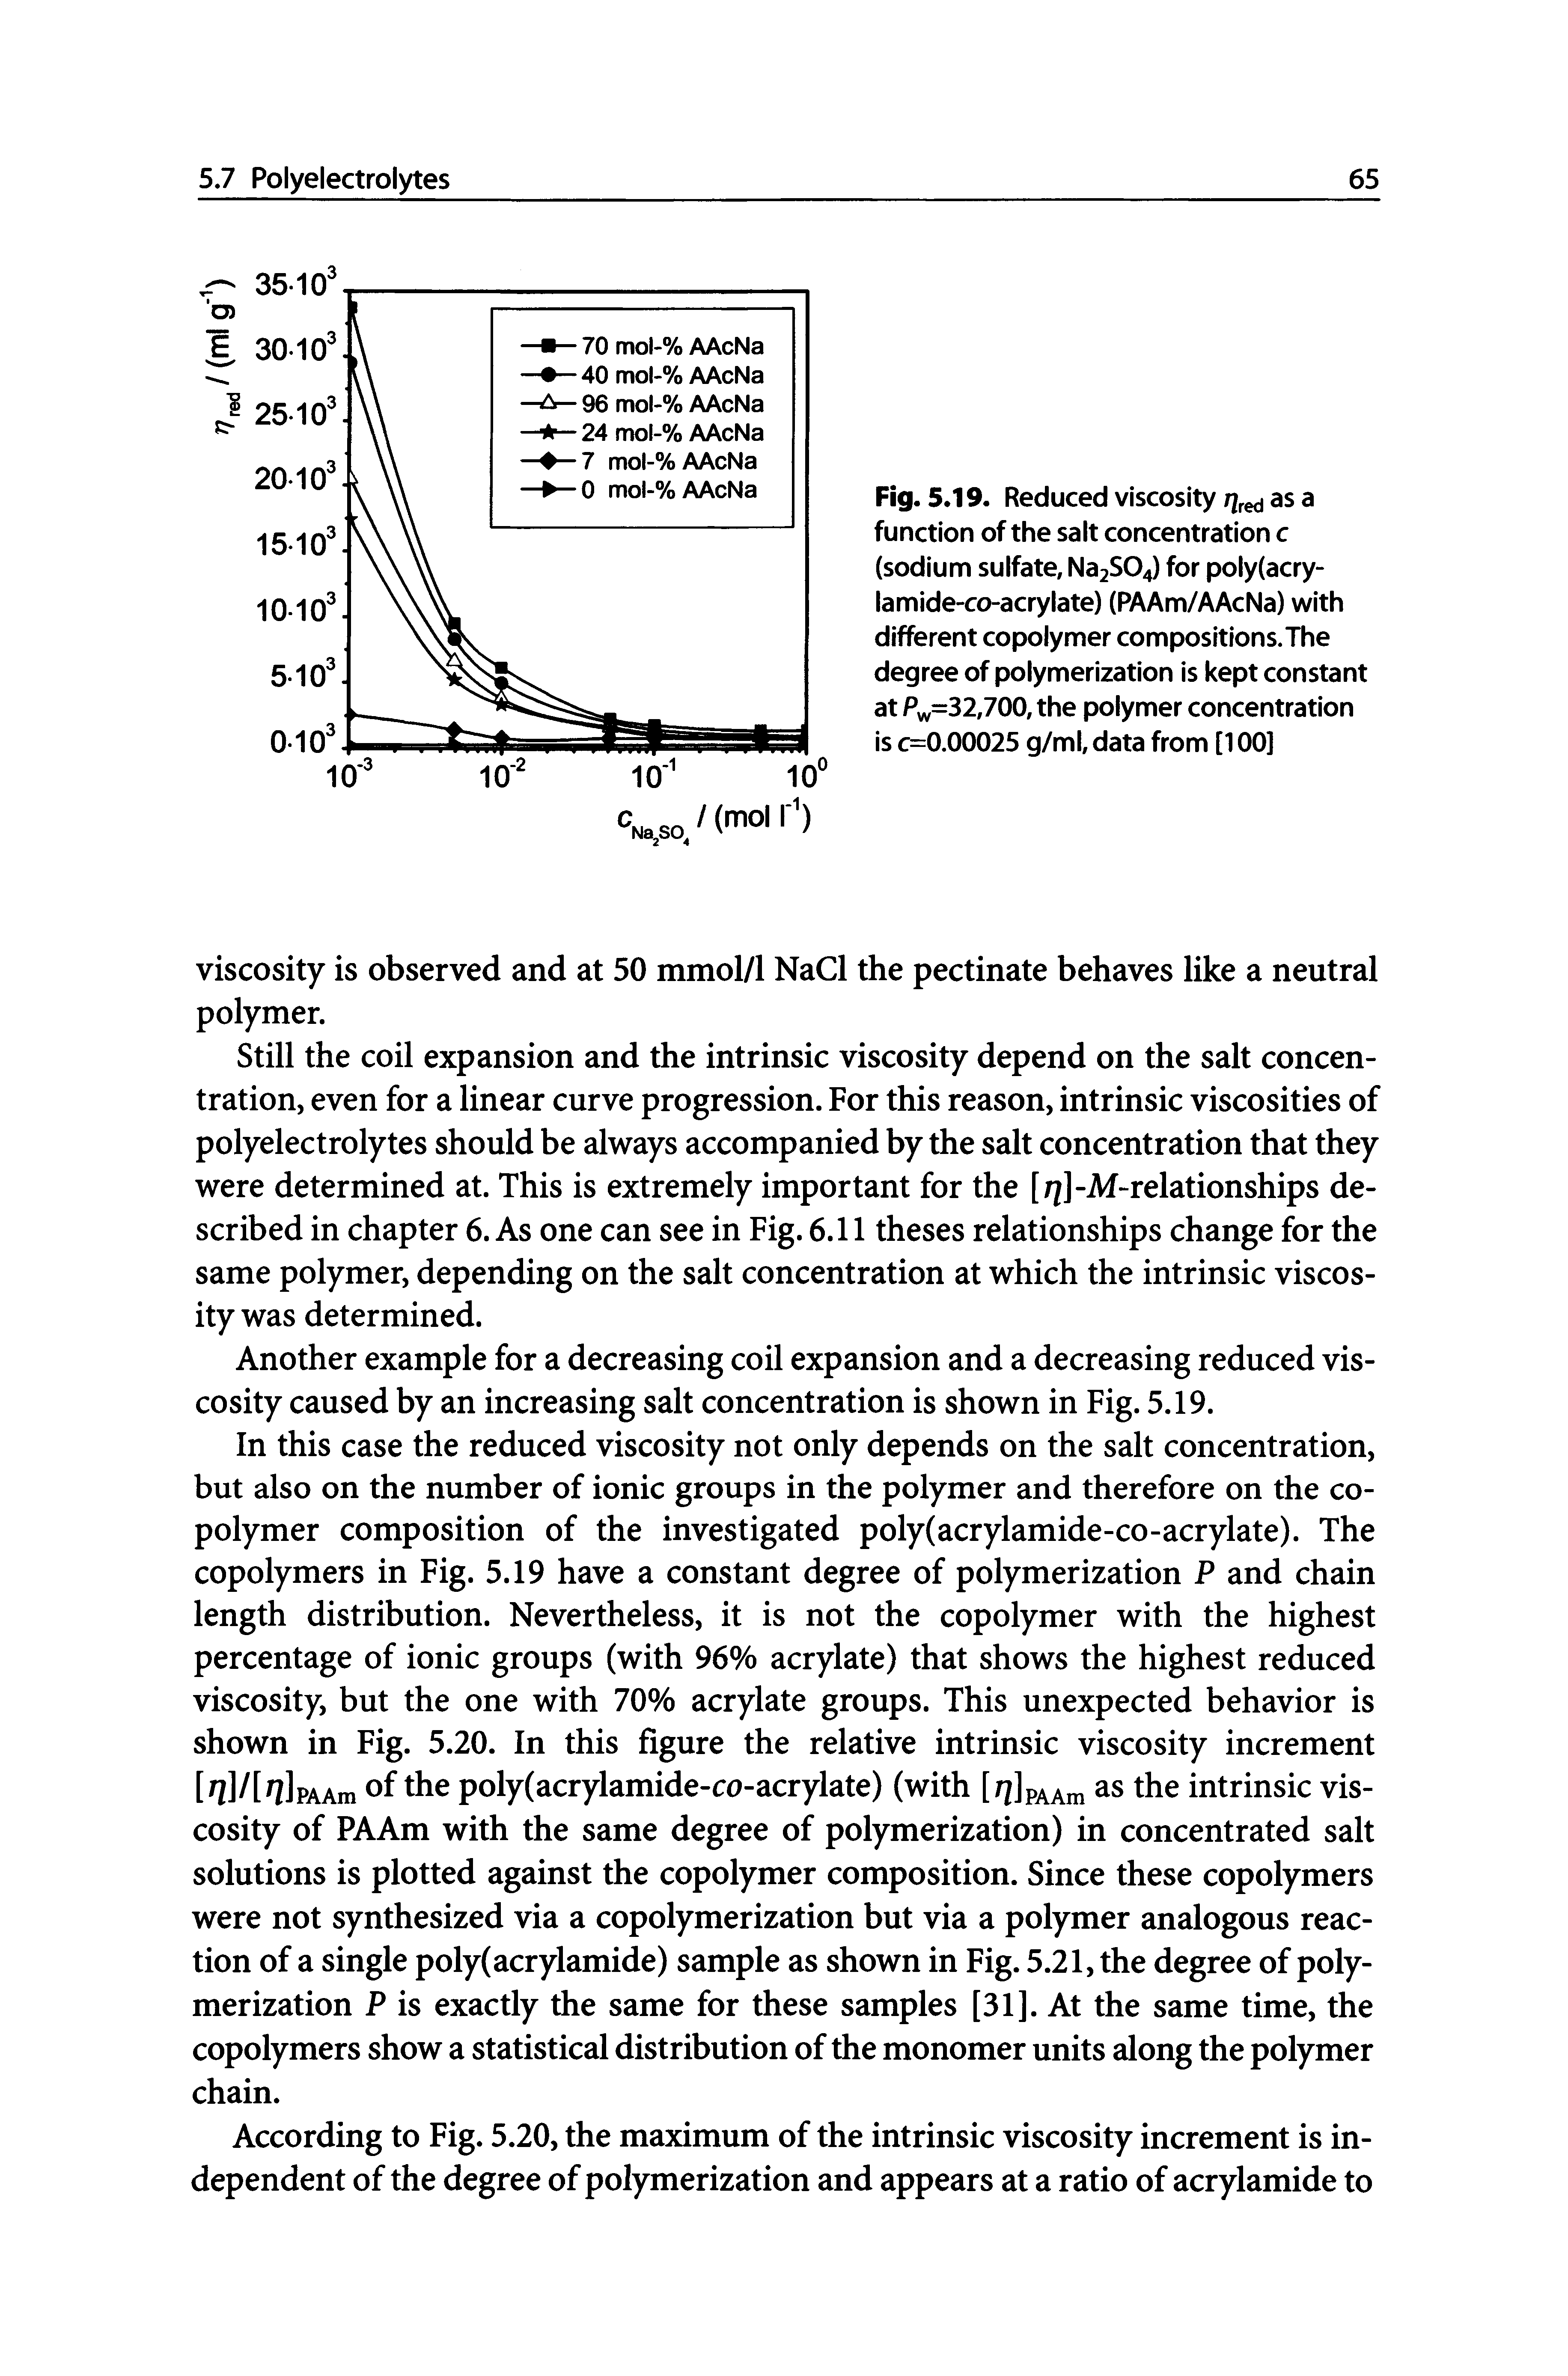 Fig. 5.19. Reduced viscosity ss a function of the salt concentration c (sodium sulfate, Na2S04) for poly(acry-lamide-co-acrylate) (PAAm/AAcNa) with different copolymer compositions.The degree of polymerization is kept constant at Pvv=32,700, the polymer concentration is c=0.00025 g/ml, data from [100]...